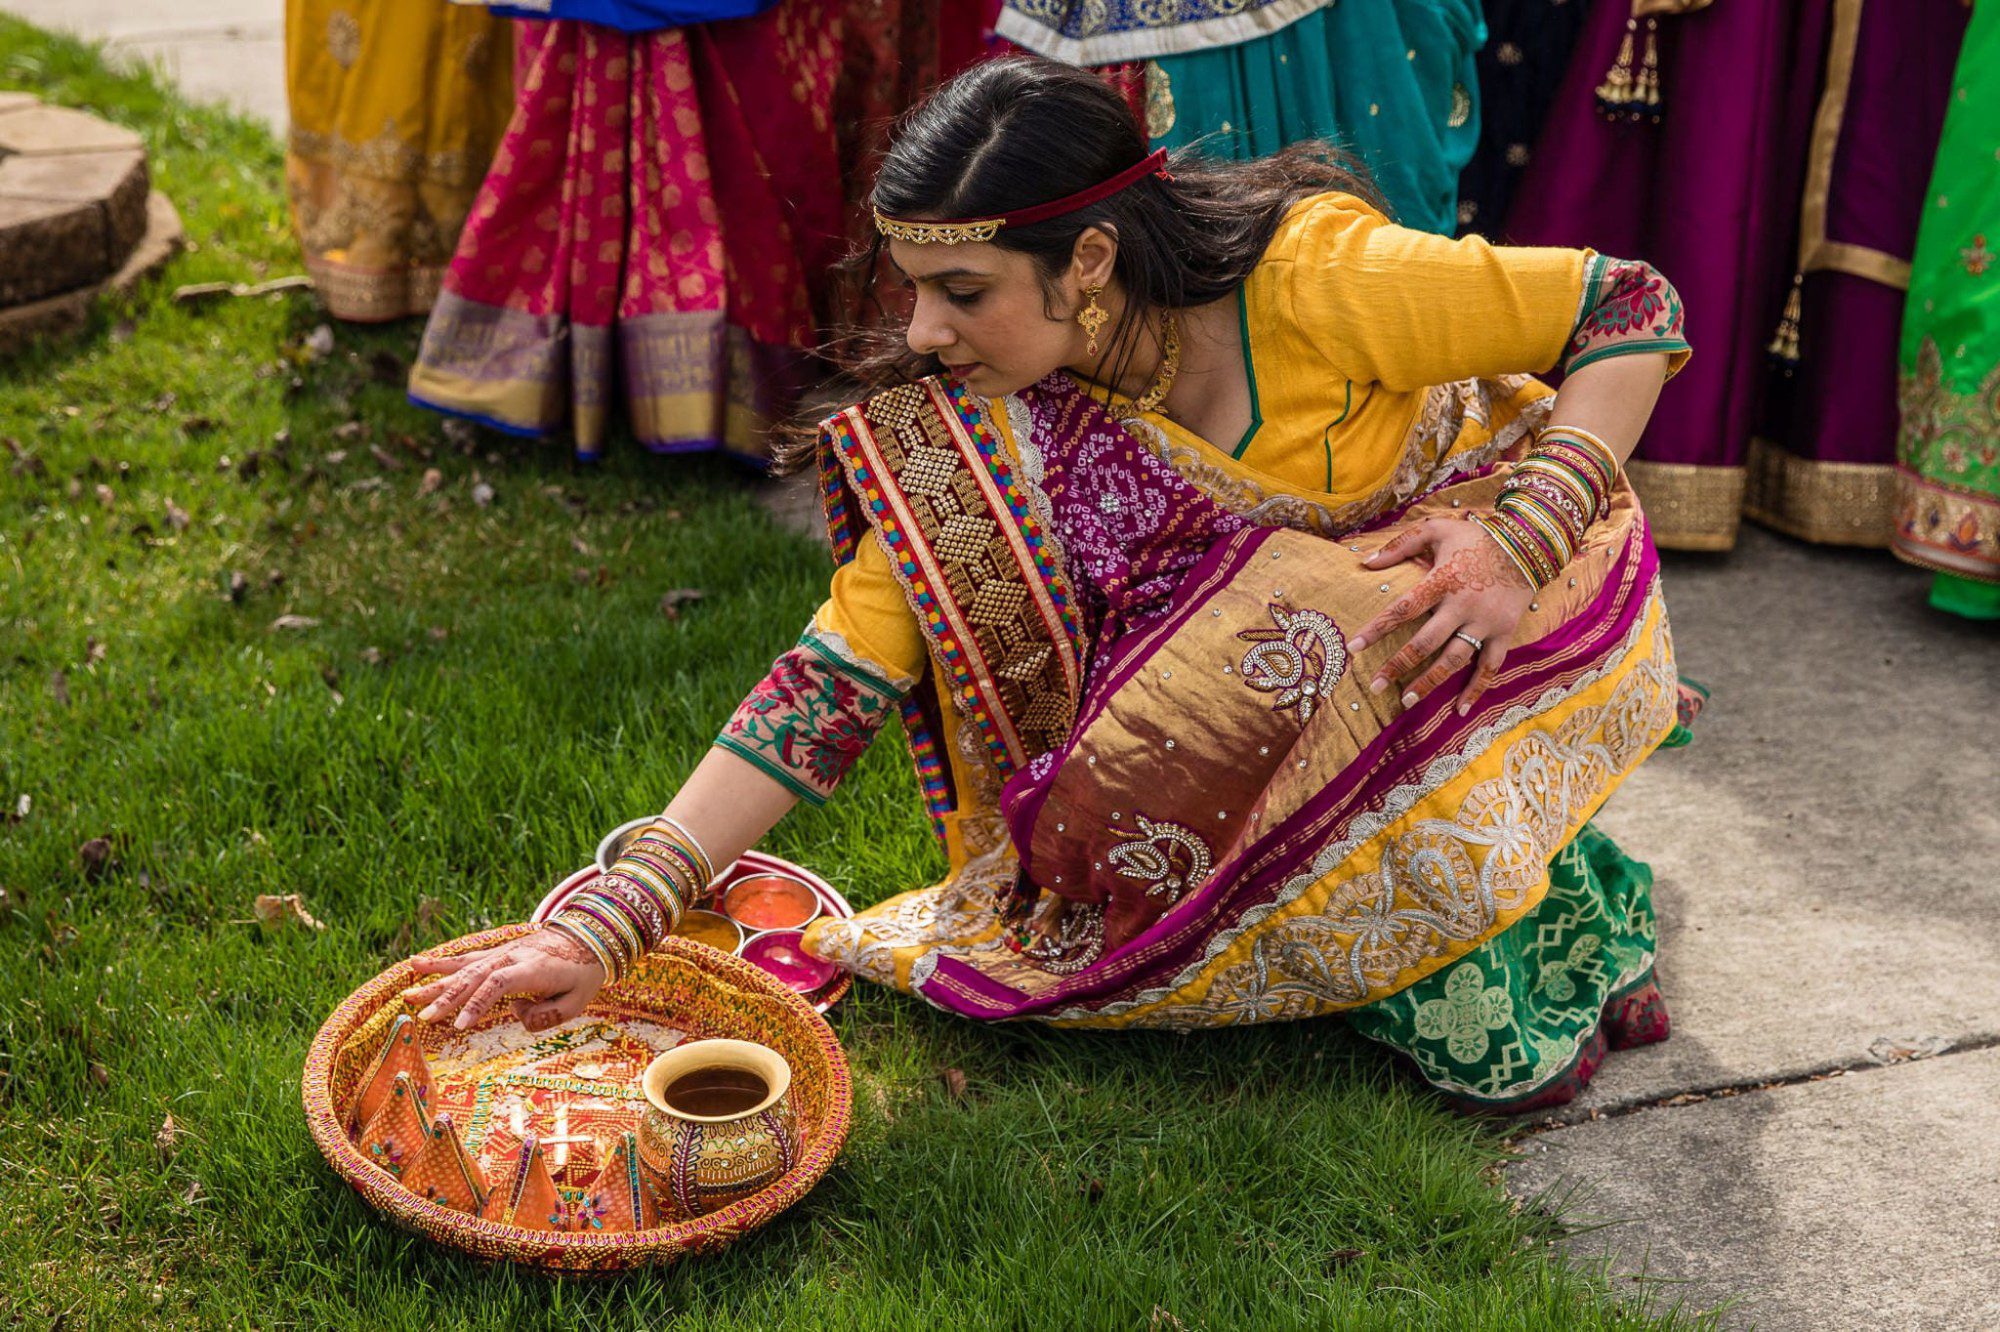 South Asian wedding tradition